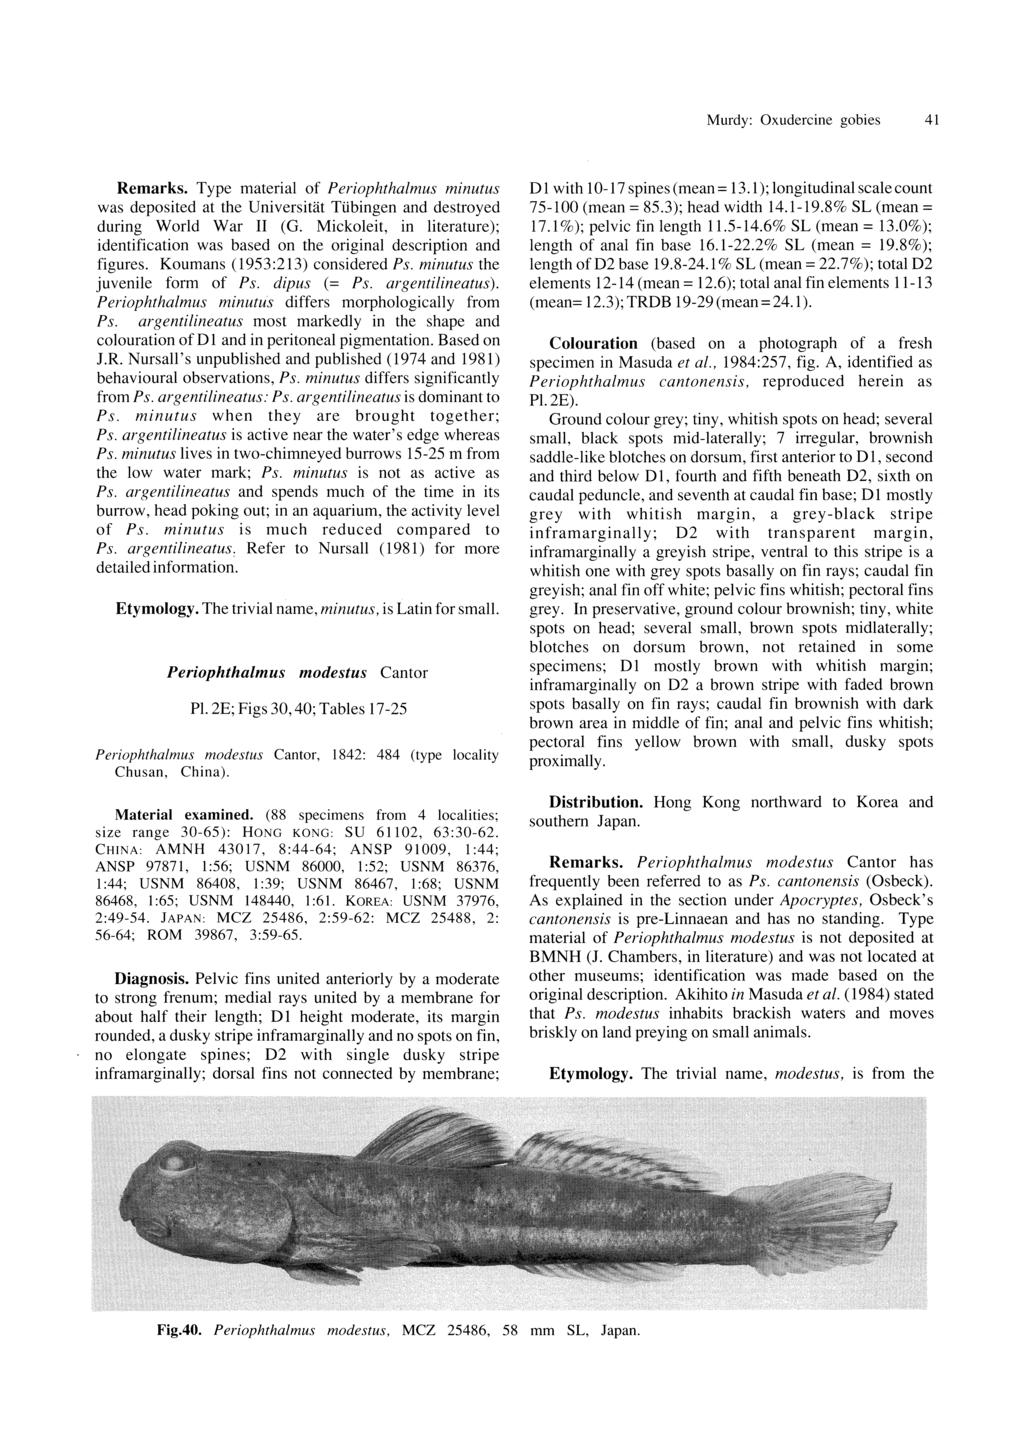 Murdy: Oxudercine gobies 41 Remarks. Type material of Periophthalmus minutus was deposited at the UniversWit Tiibingen and destroyed during World War II (G.